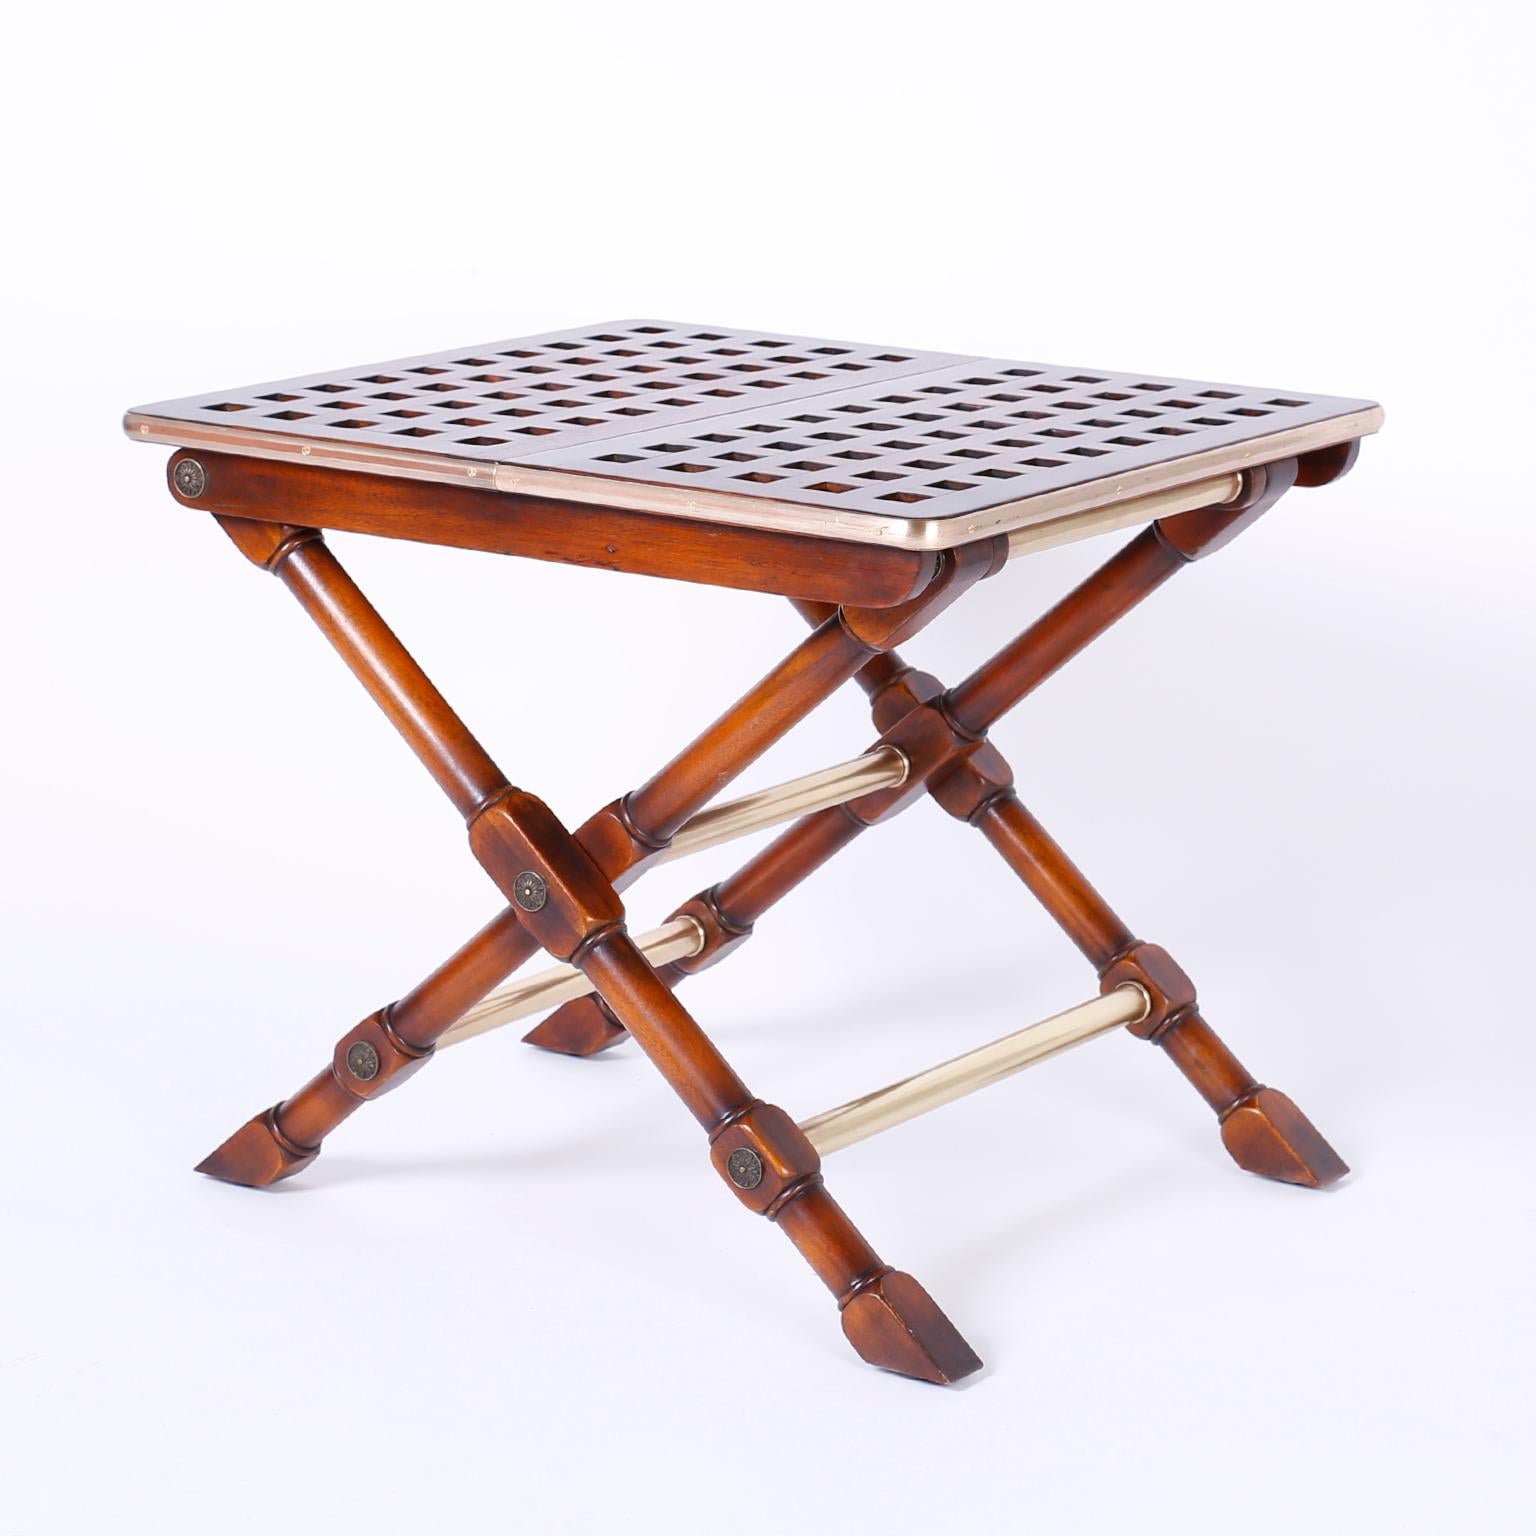 British Colonial Pair of Yacht Style Folding Tables